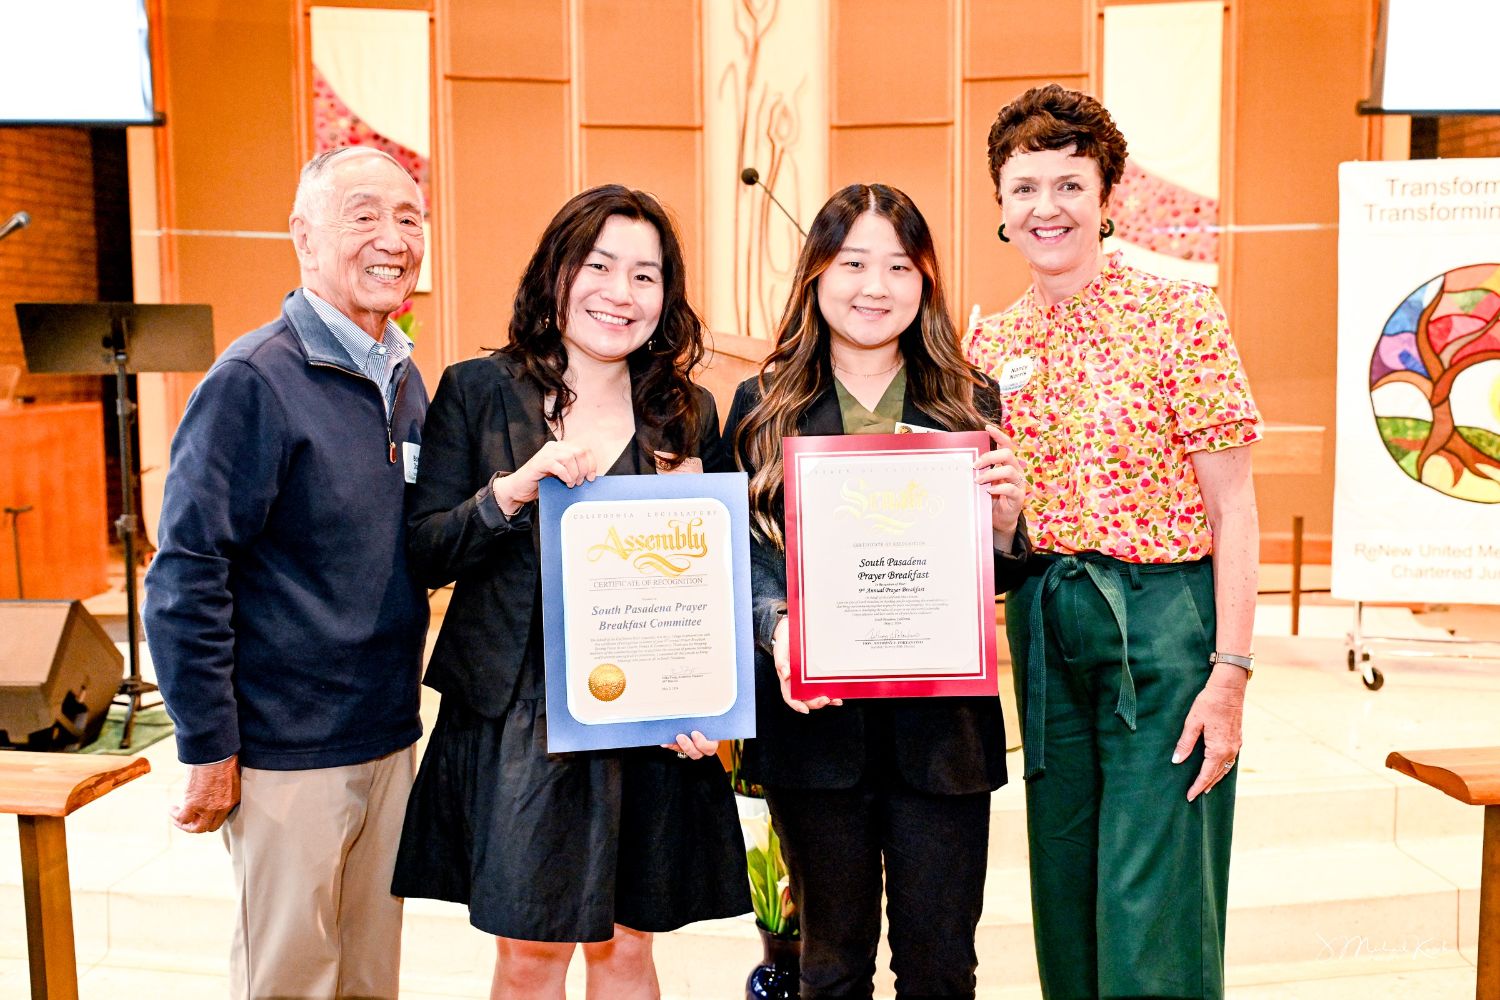 PHOTO: J. Mike Kwok |  South Pasadenan |  Former Mayor and SPPB Committee Member Bob Joe, Jessica Tang, Erica Nam and SPPB President Nancy Norris.  Representatives of Assembly Member Mike Fong and Senator Anthony Portantino (respectively) present certificates of appreciation to the South Pasadena Prayer Breakfast committee.